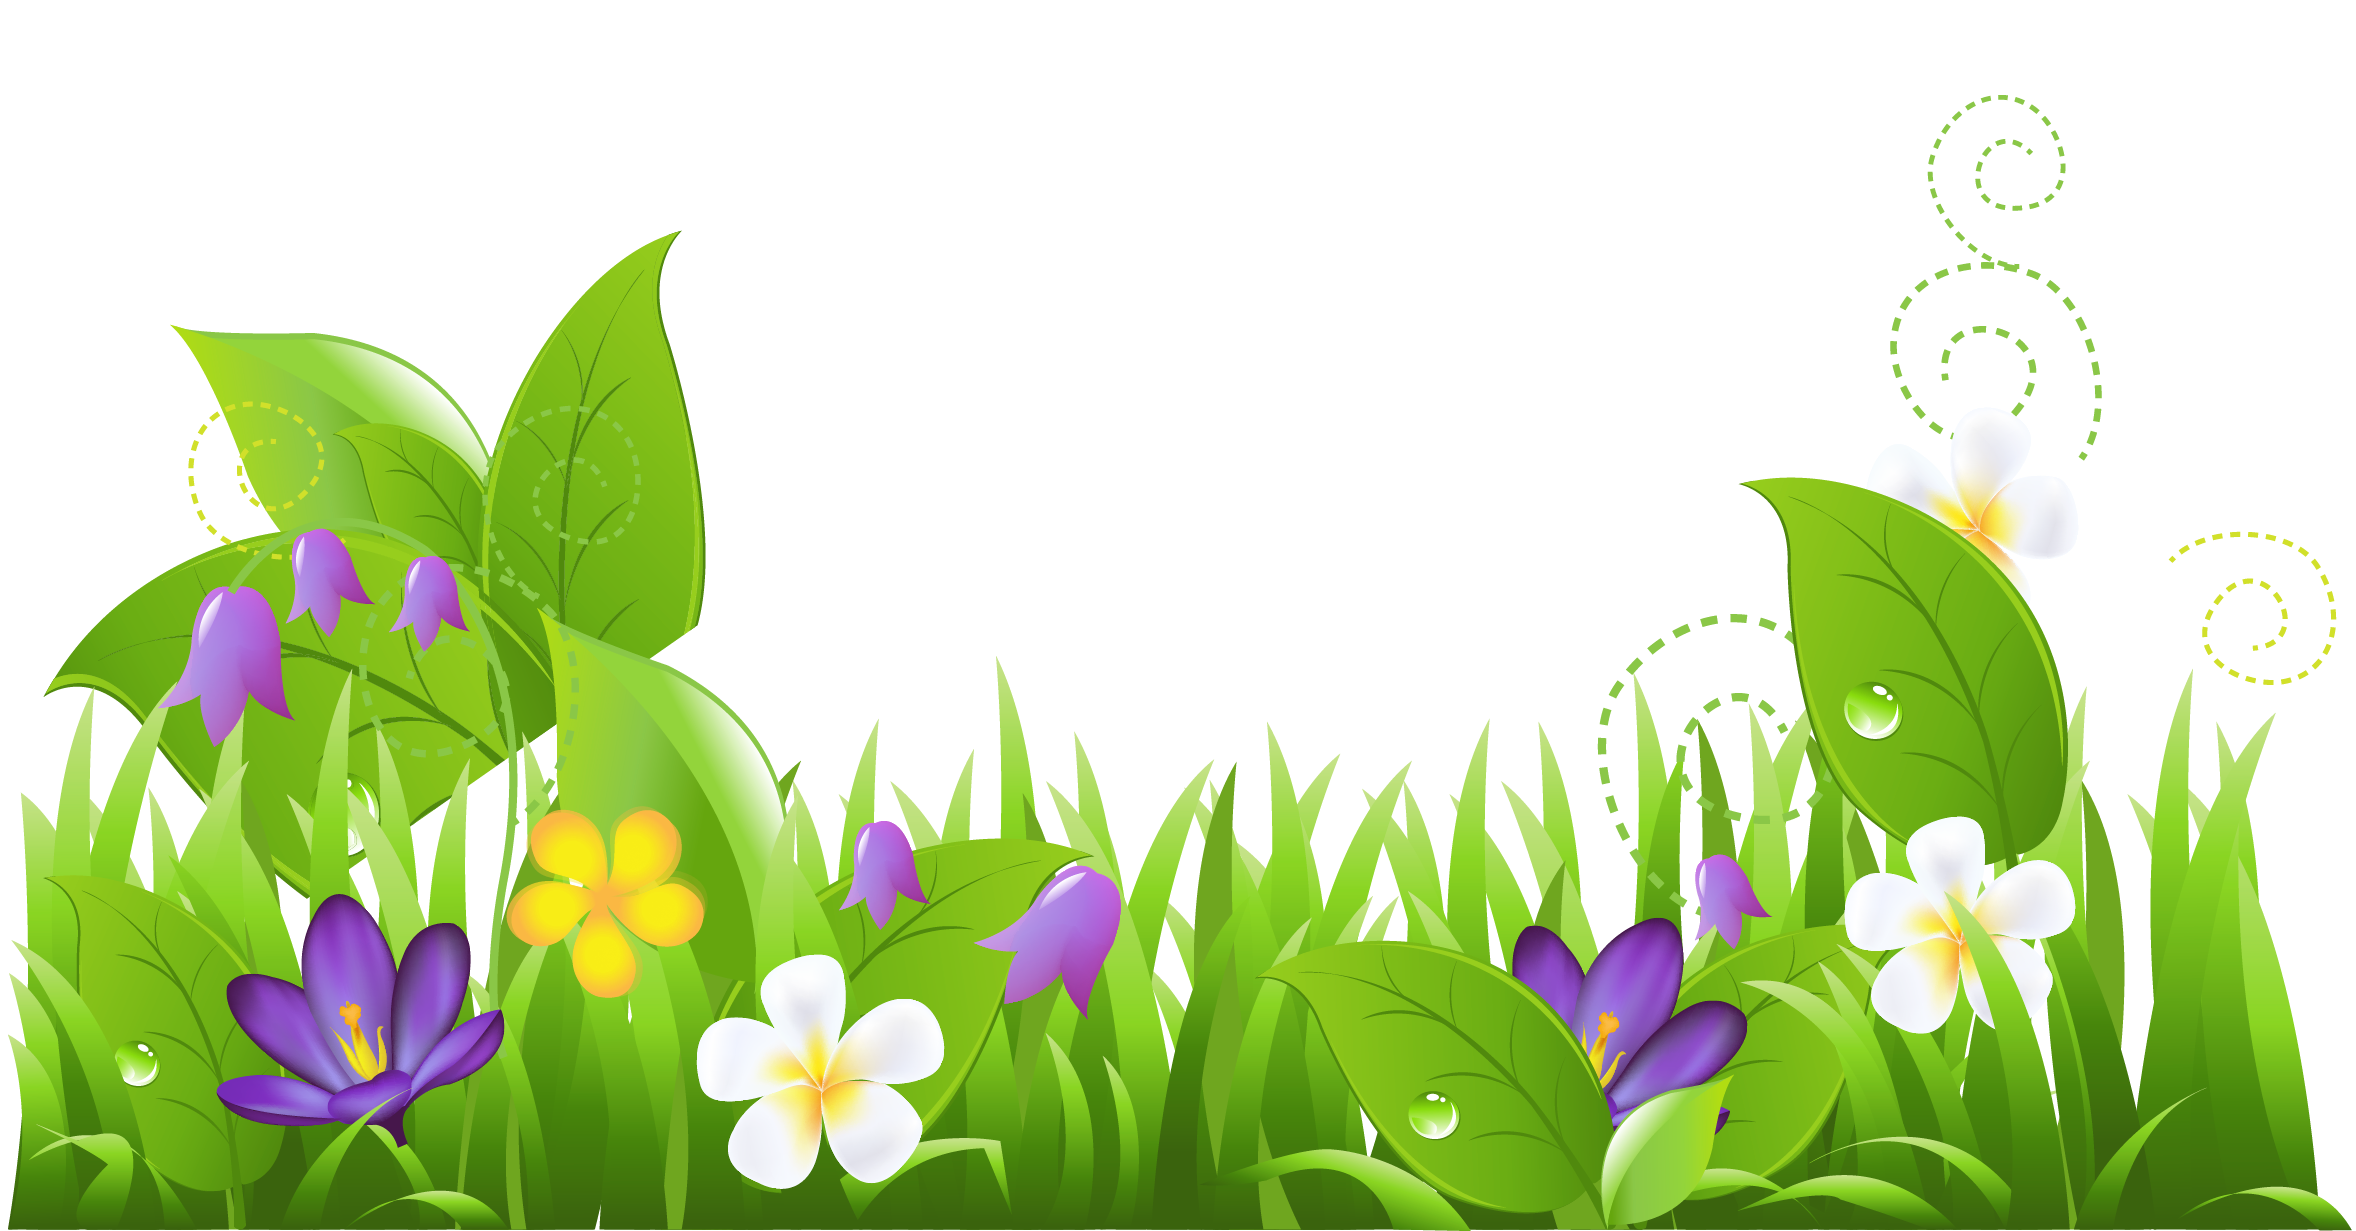 Grass and flowers clipart clipart clipart image